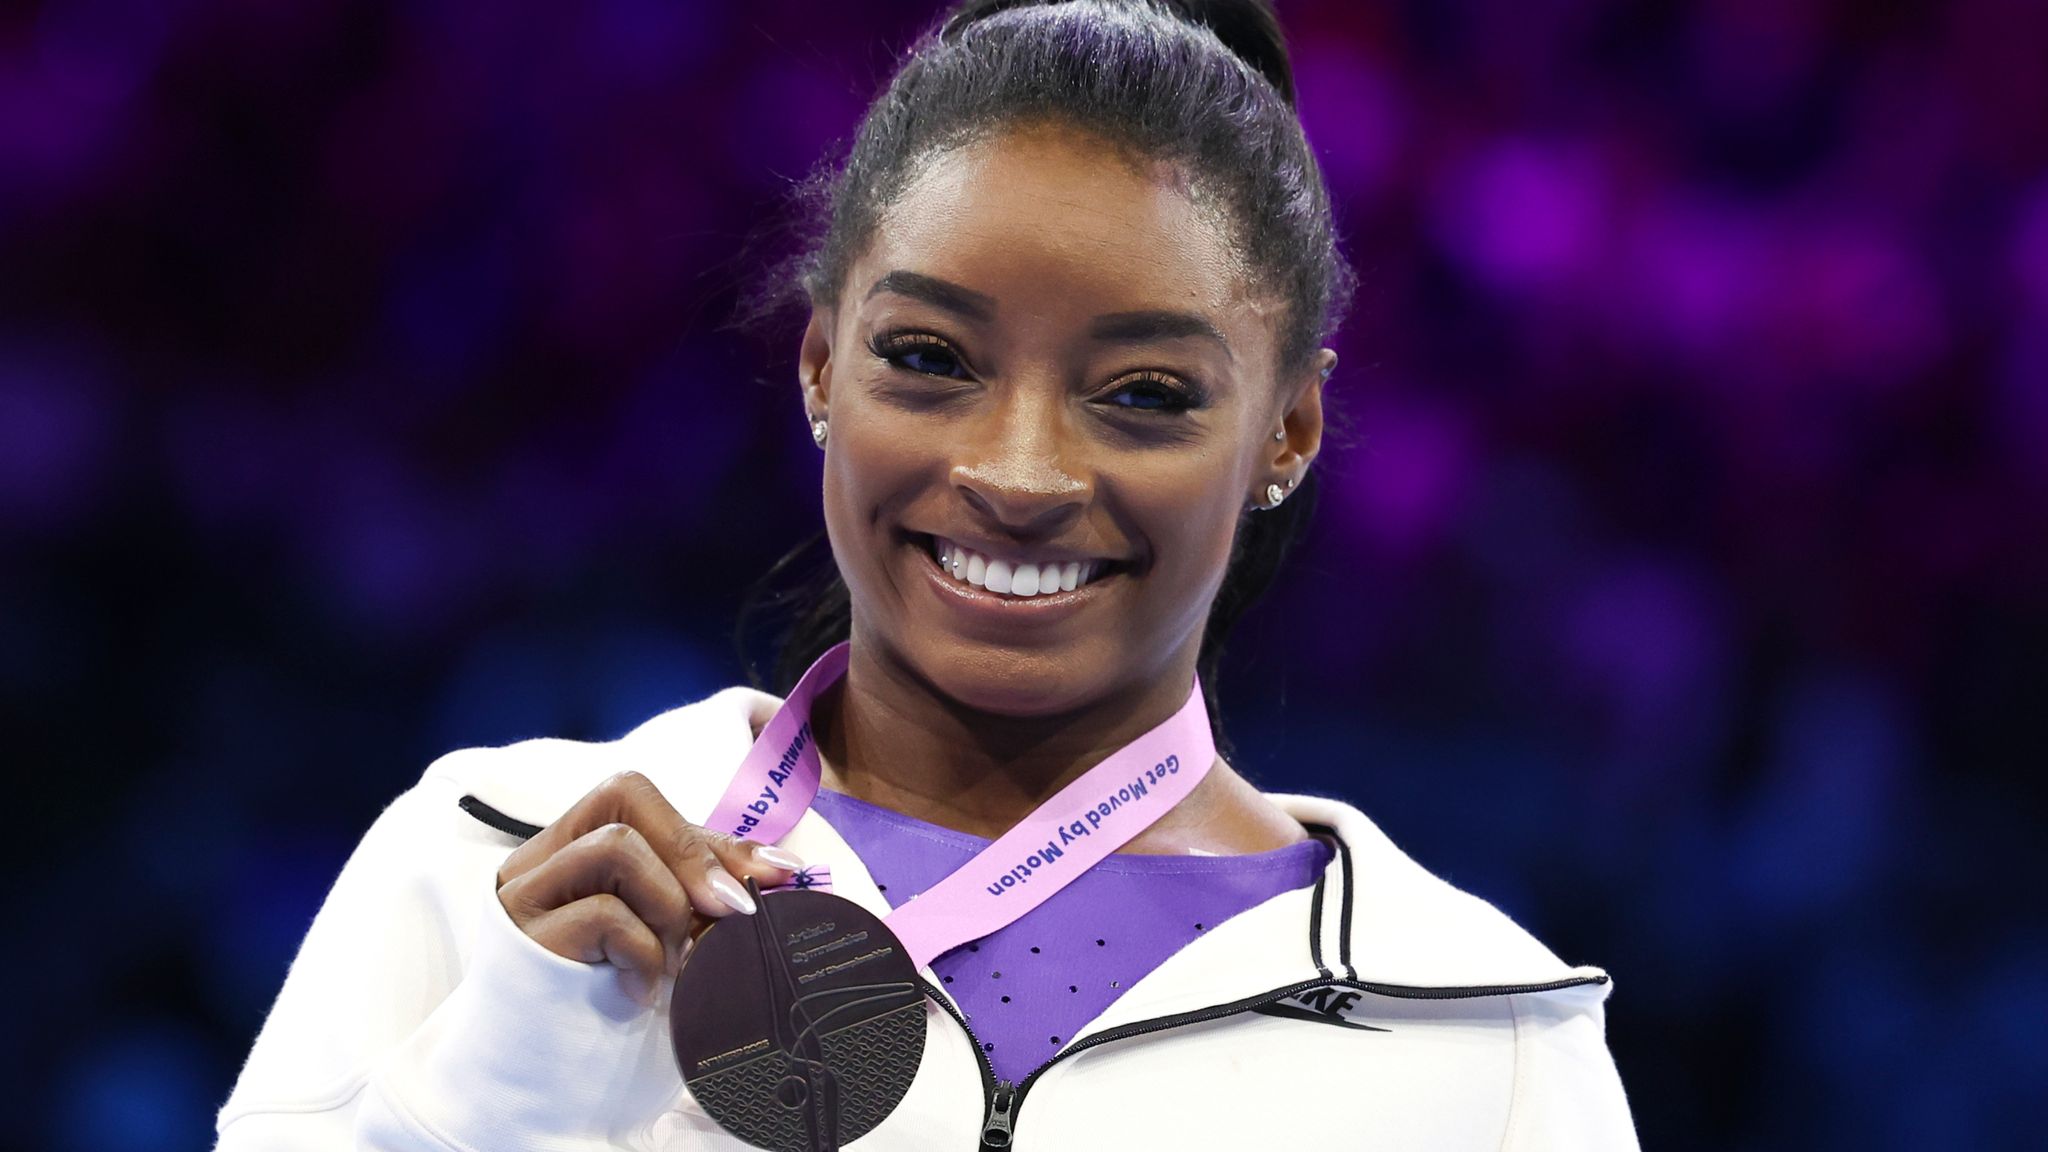 Simone Biles wins two more gold medals for USA at World